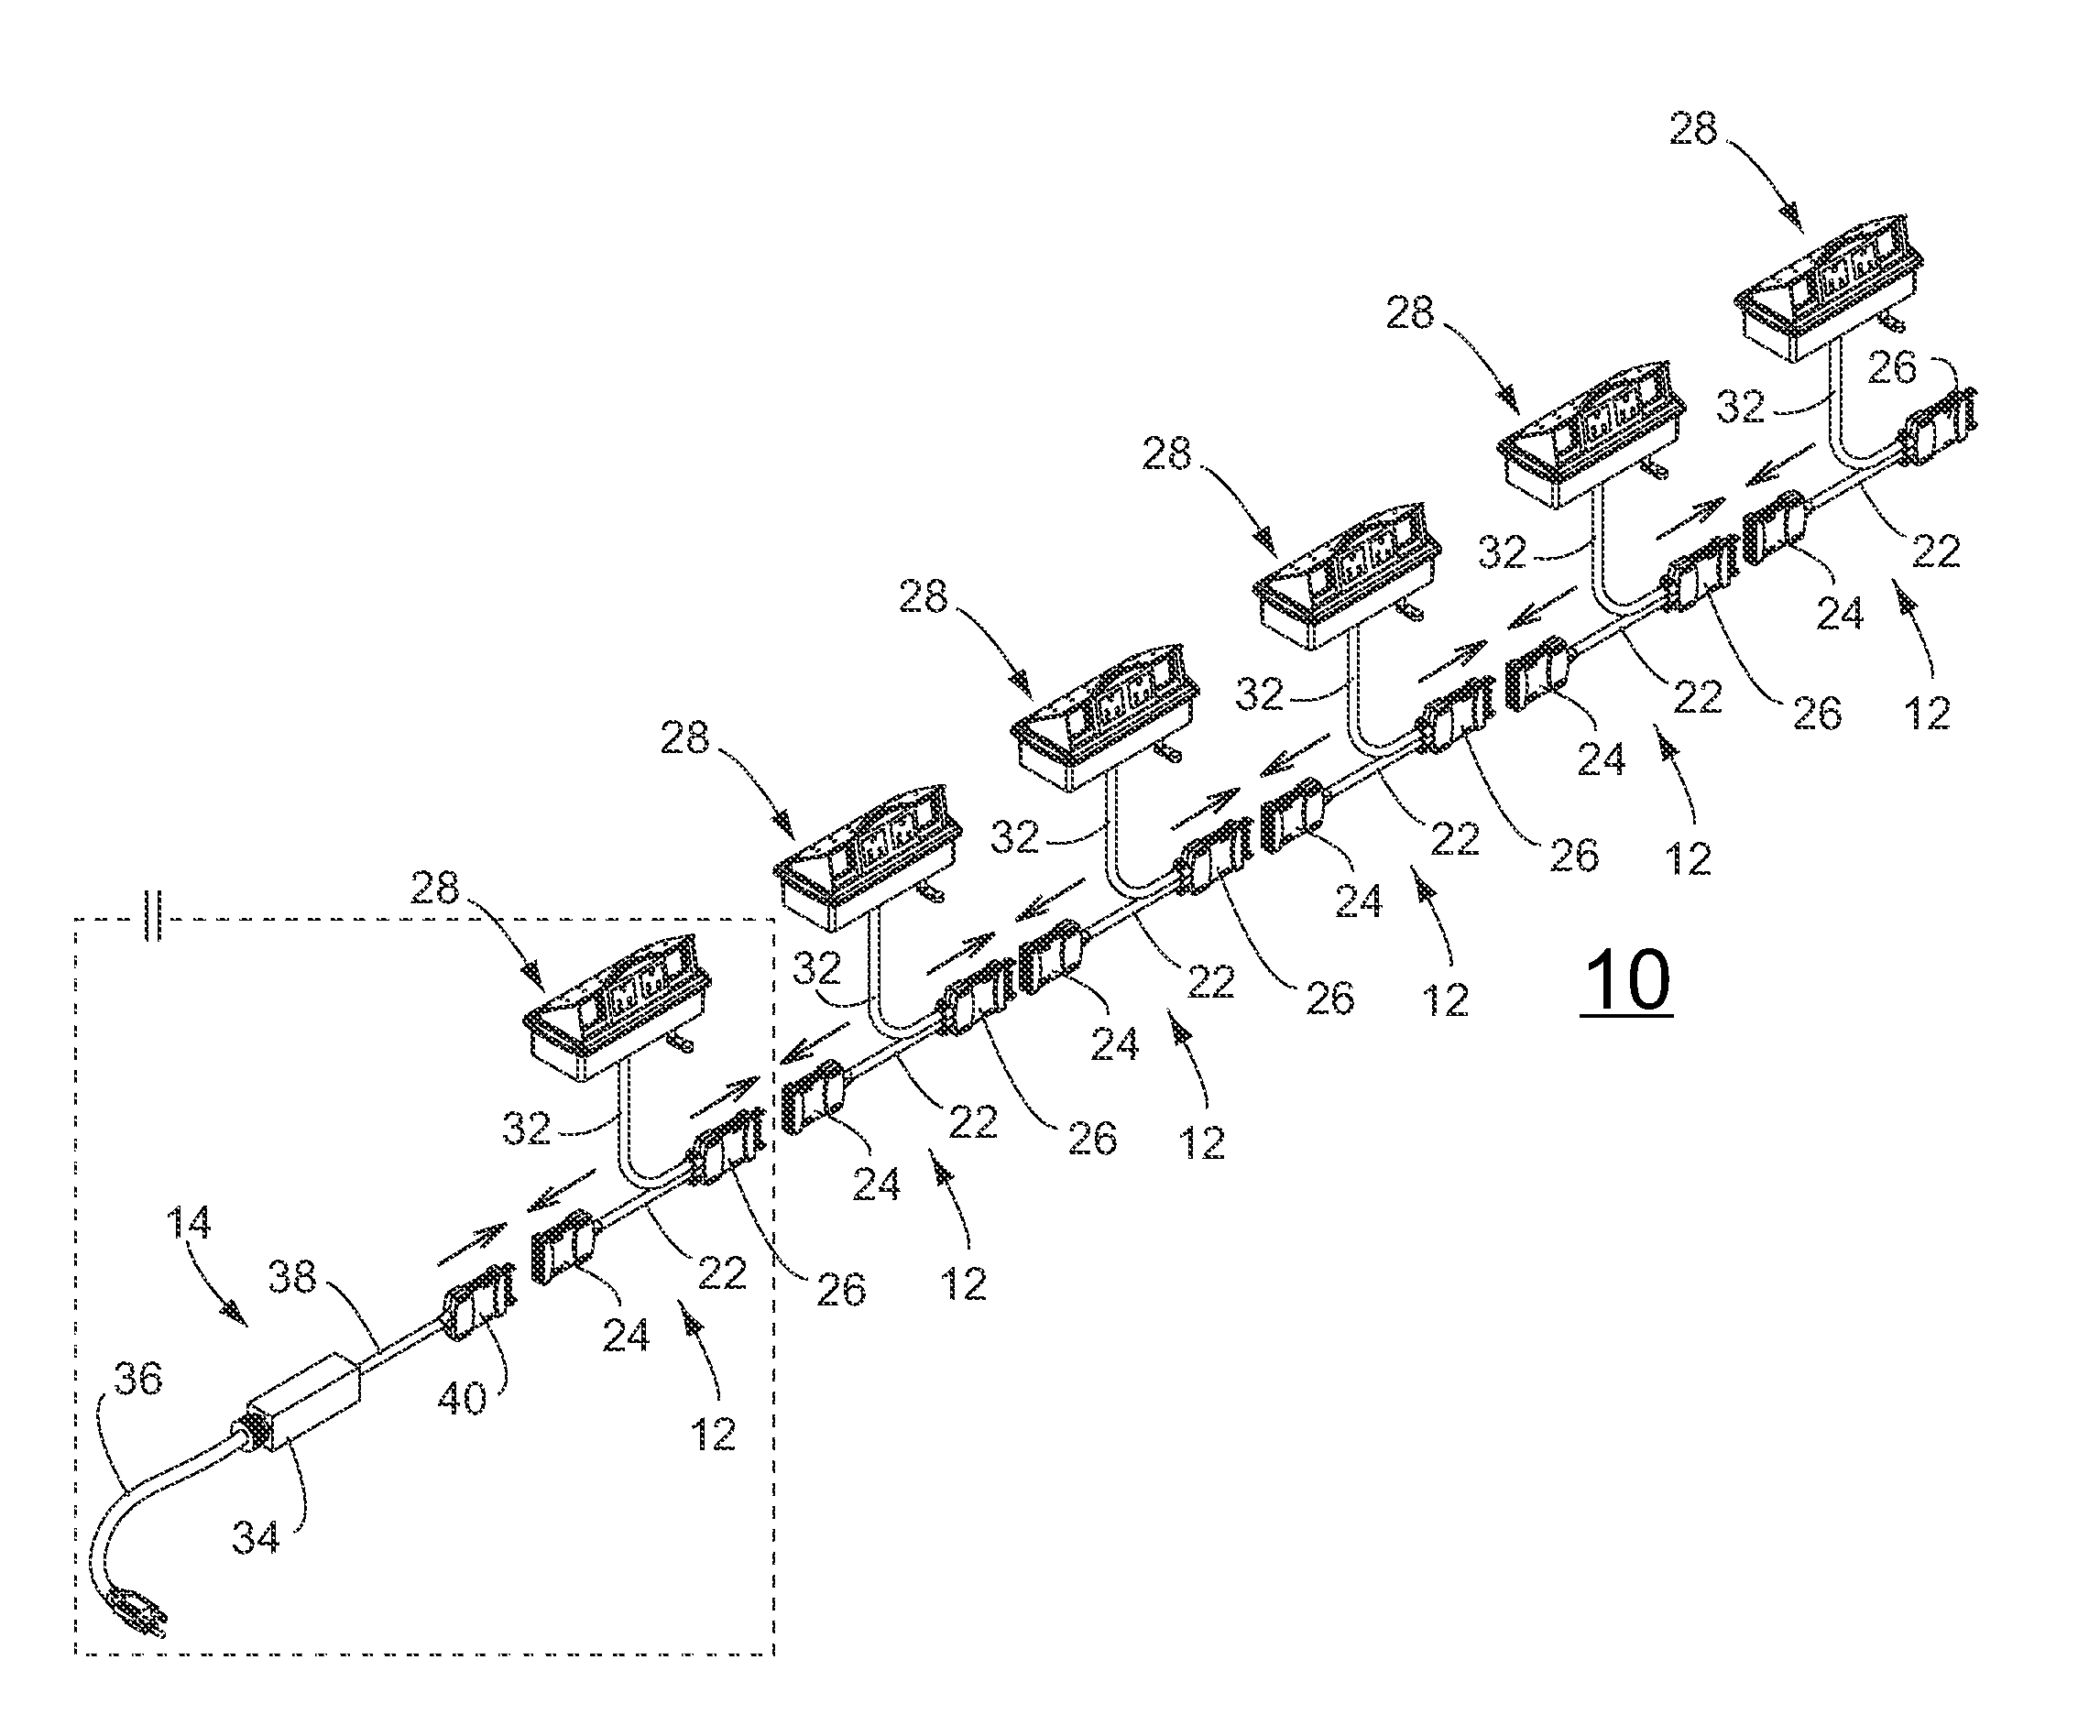 Electrical system with circuit limiter